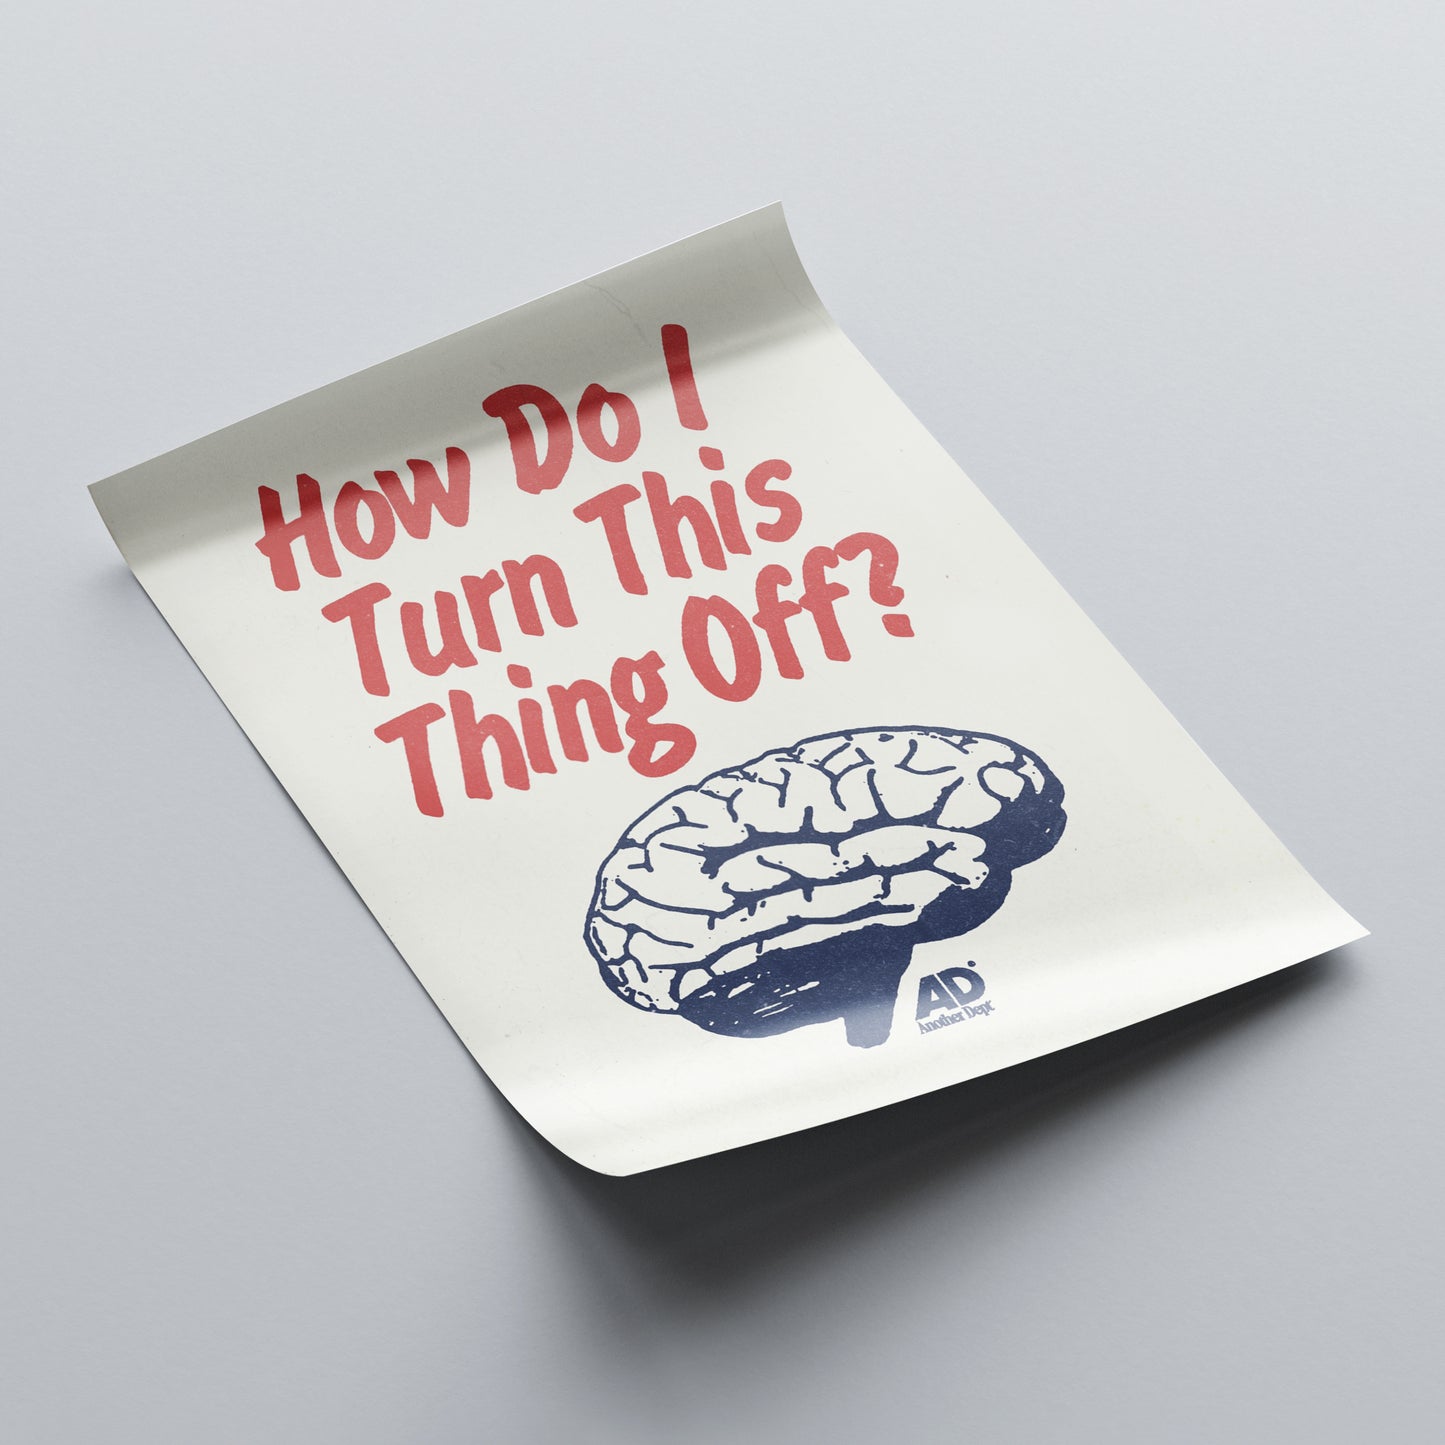 Turn This Thing Off - Print